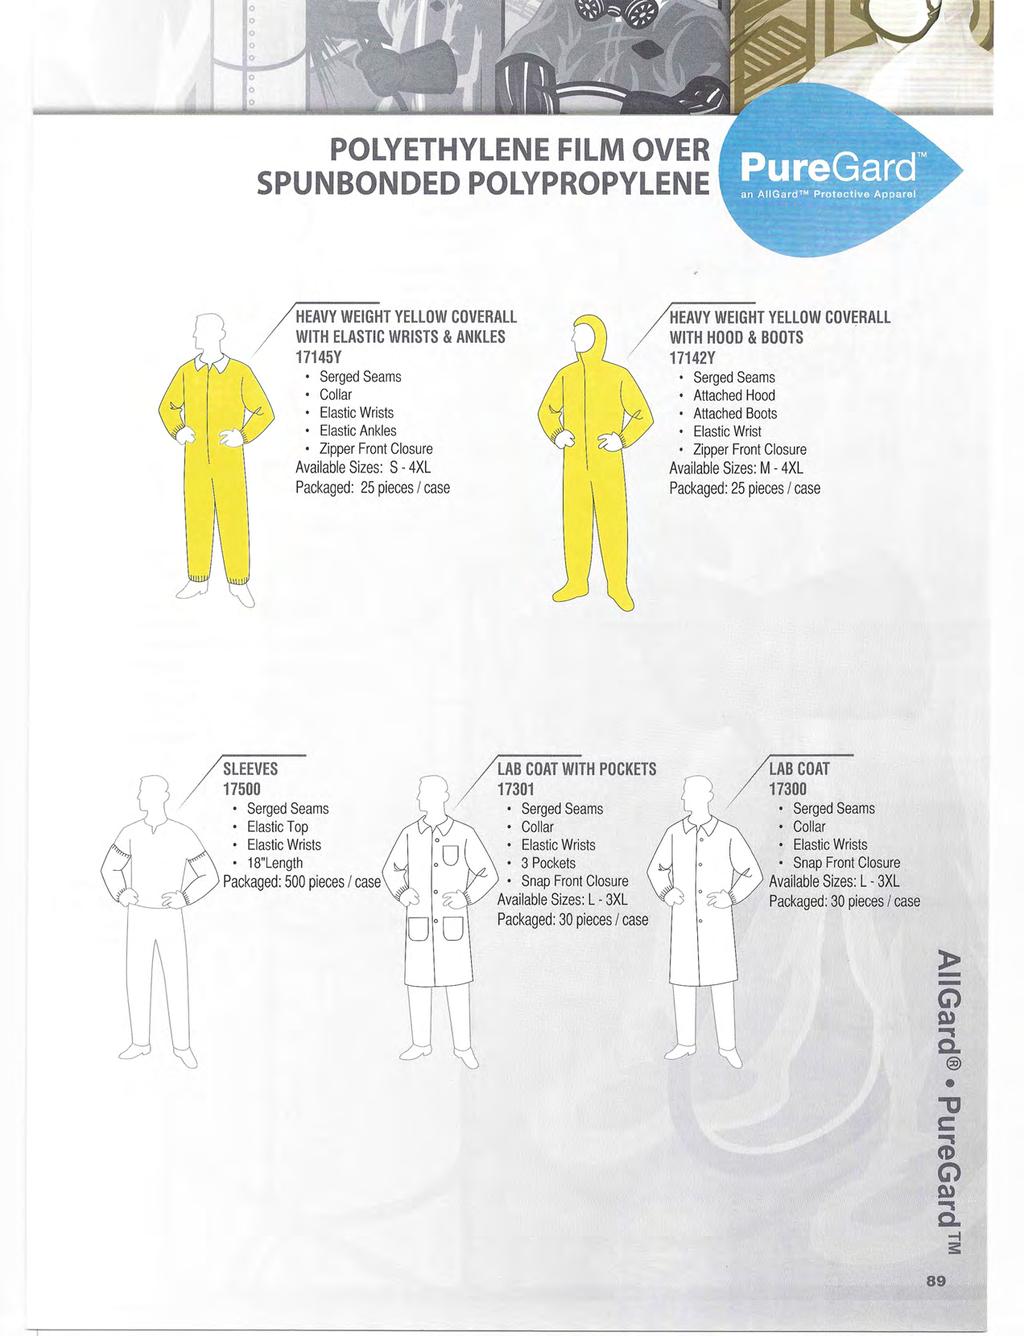 C,o POLYETHYLENE FILM OVER SPUNBONDED POLYPROPYLENE HEAVY WEIGHT YELLOW COVERALL WITH ELASTIC WRISTS & ANKLES 17145Y Serged Seams Collar Elastic Wrists Elastic Ankles Zipper Front Closure Available